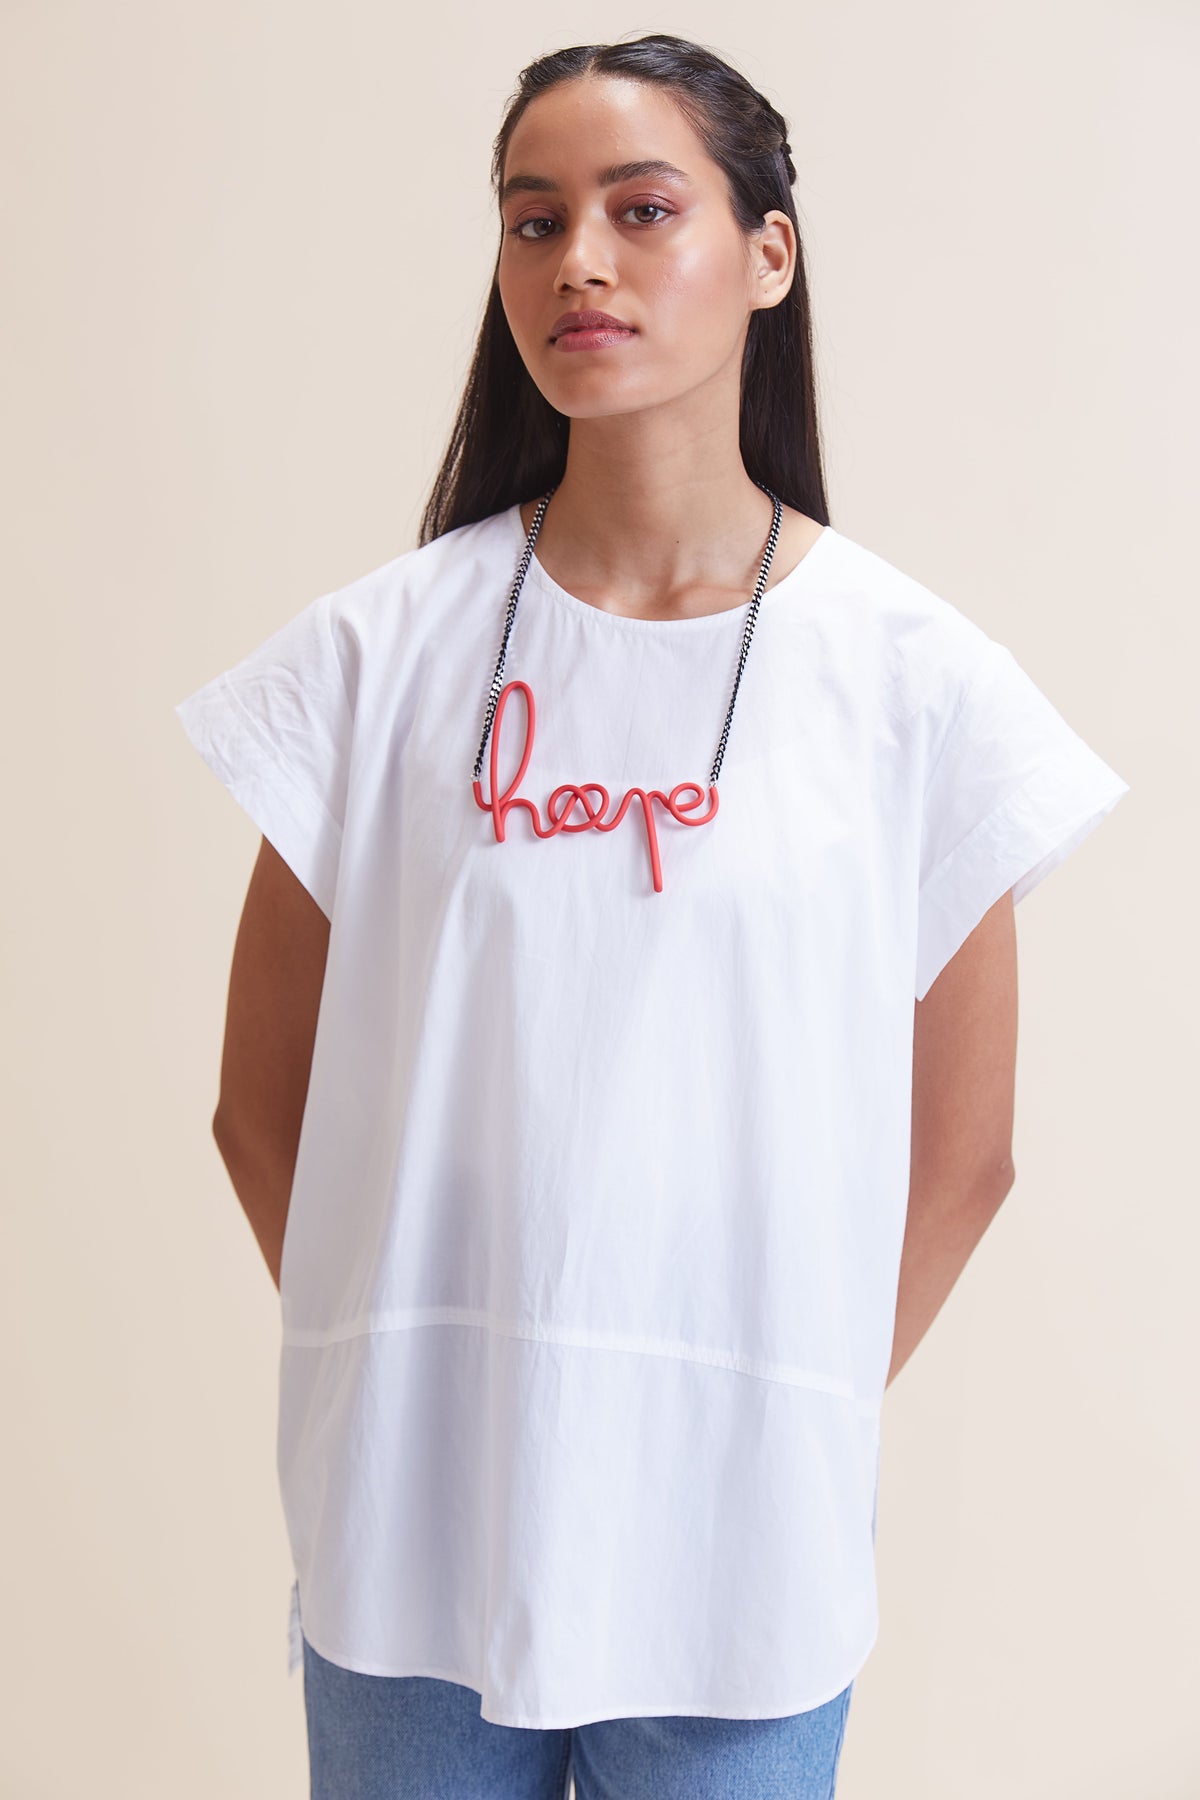 Hope Necklace Short - Coral Red